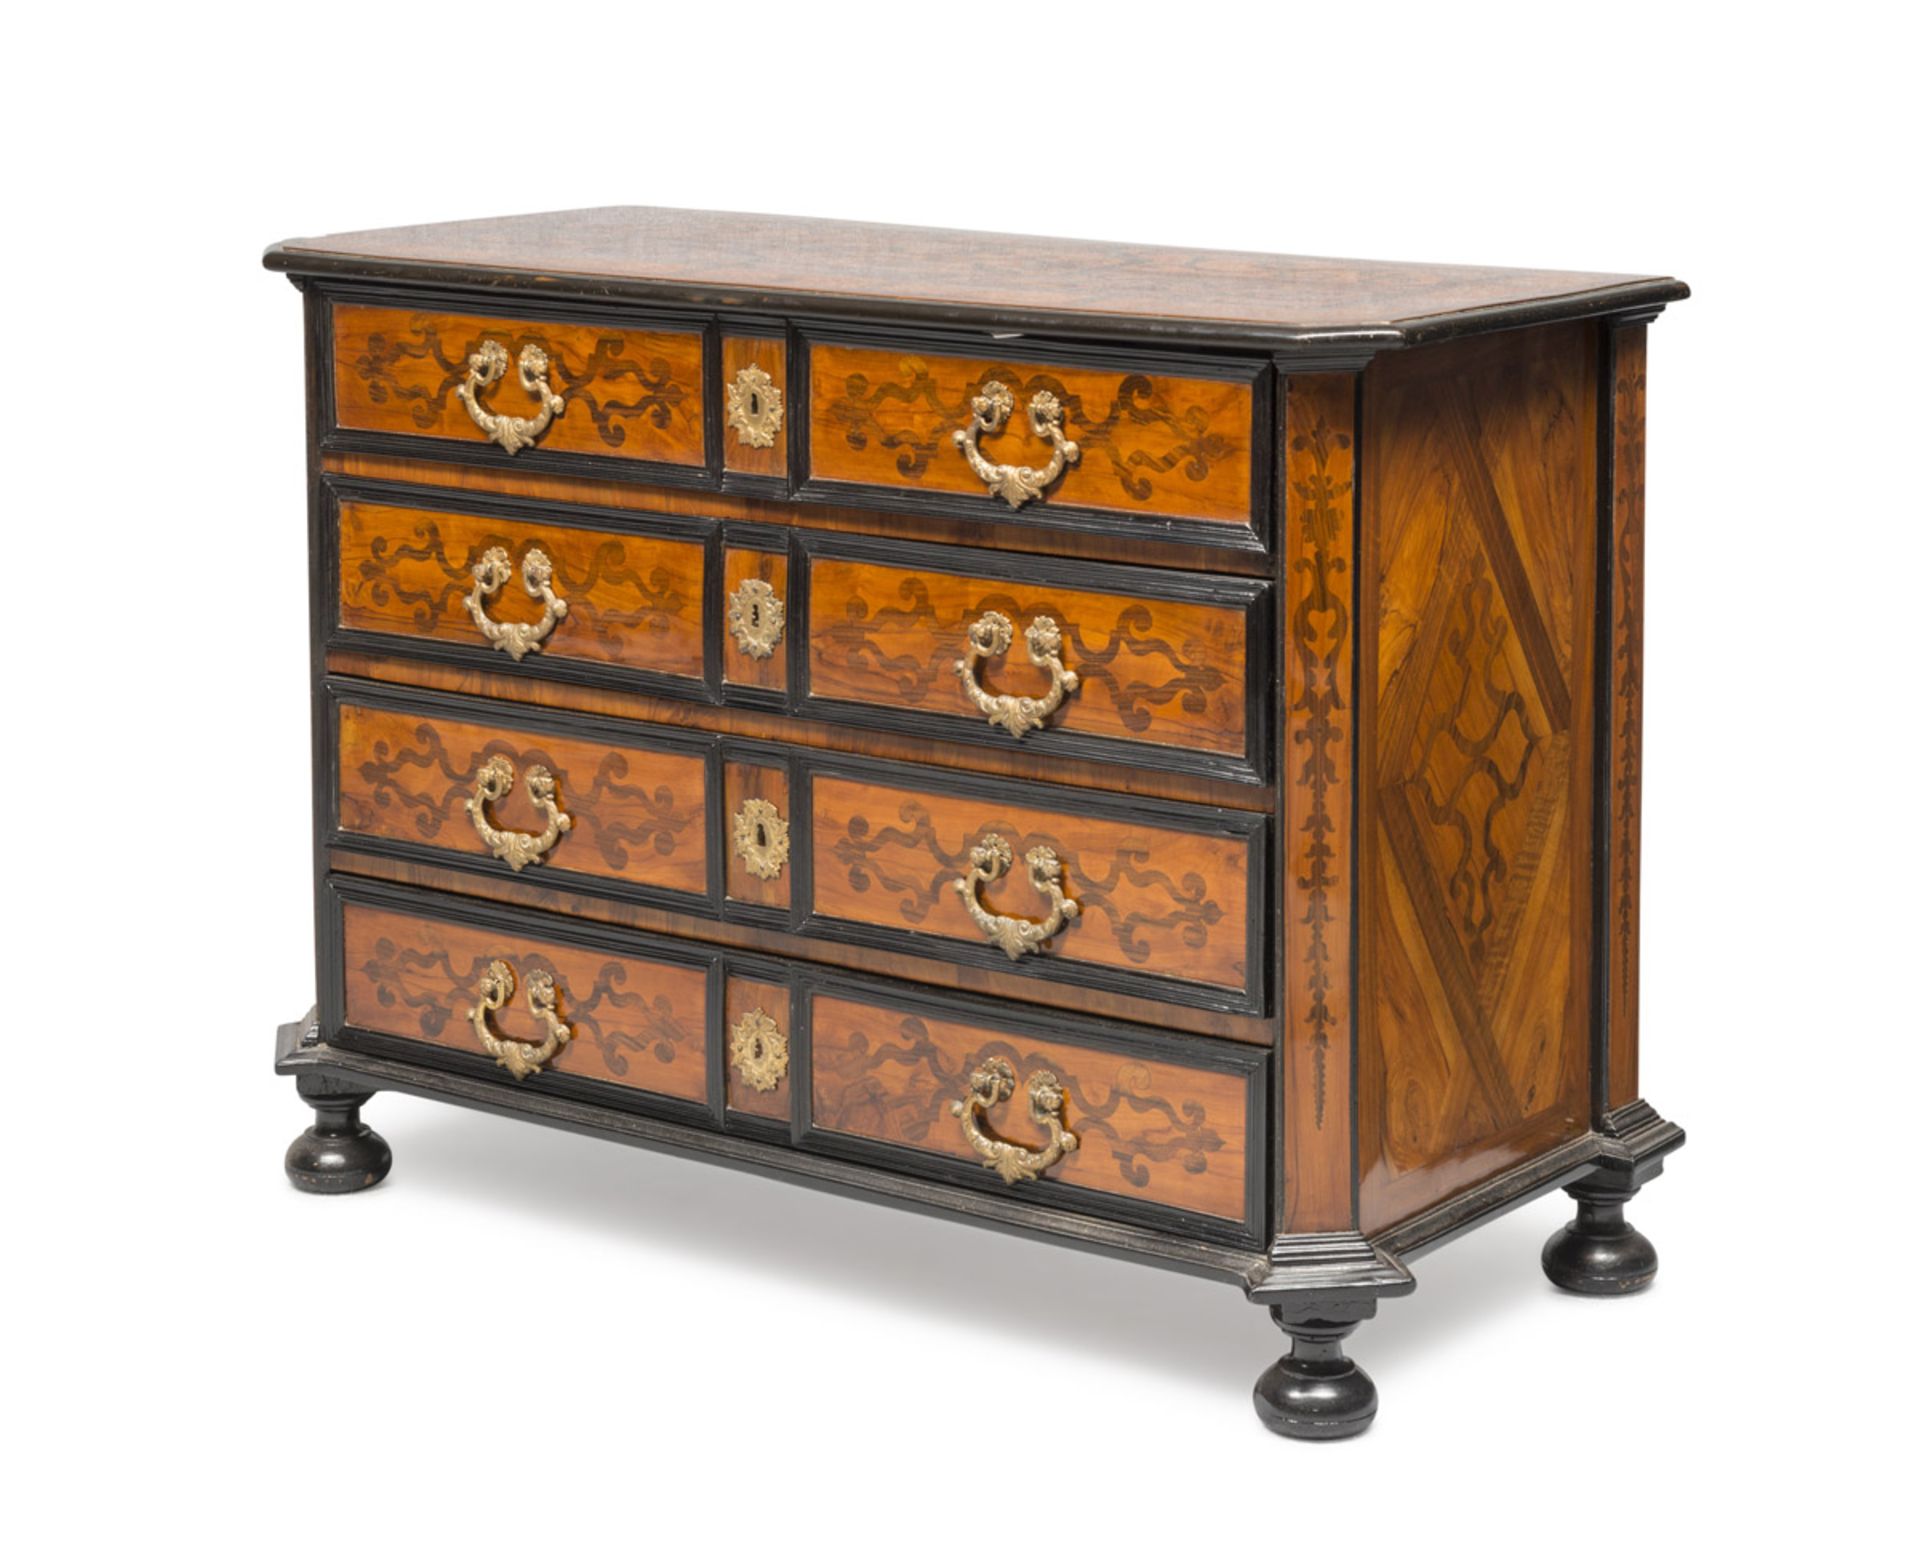 SPLENDID PIEDMONTESE COMMODE IN WALNUT AND BRIAR WALNUT, 18TH CENTURY entirely inlaid with ramages